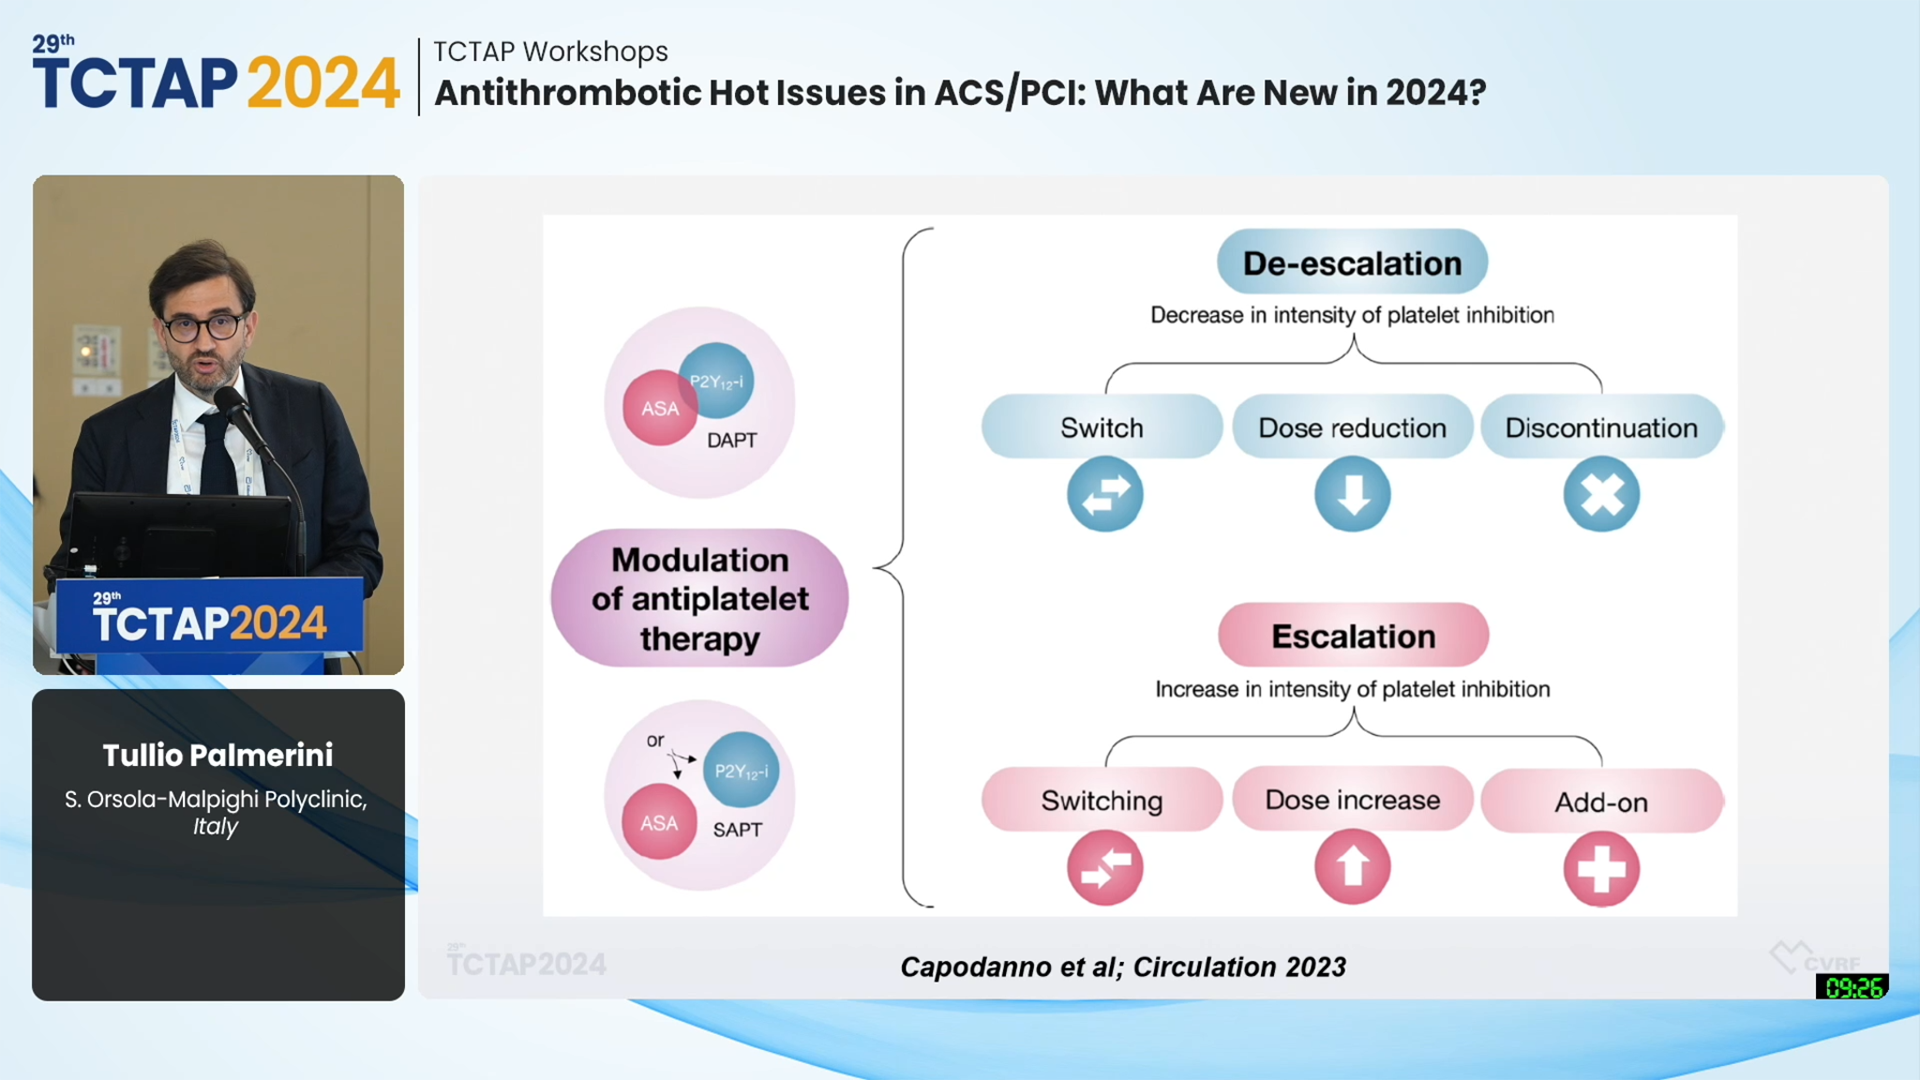 [TCTAP Workshops] Antithrombotic Hot Issues in ACS/PCI: What Are New in 2024?